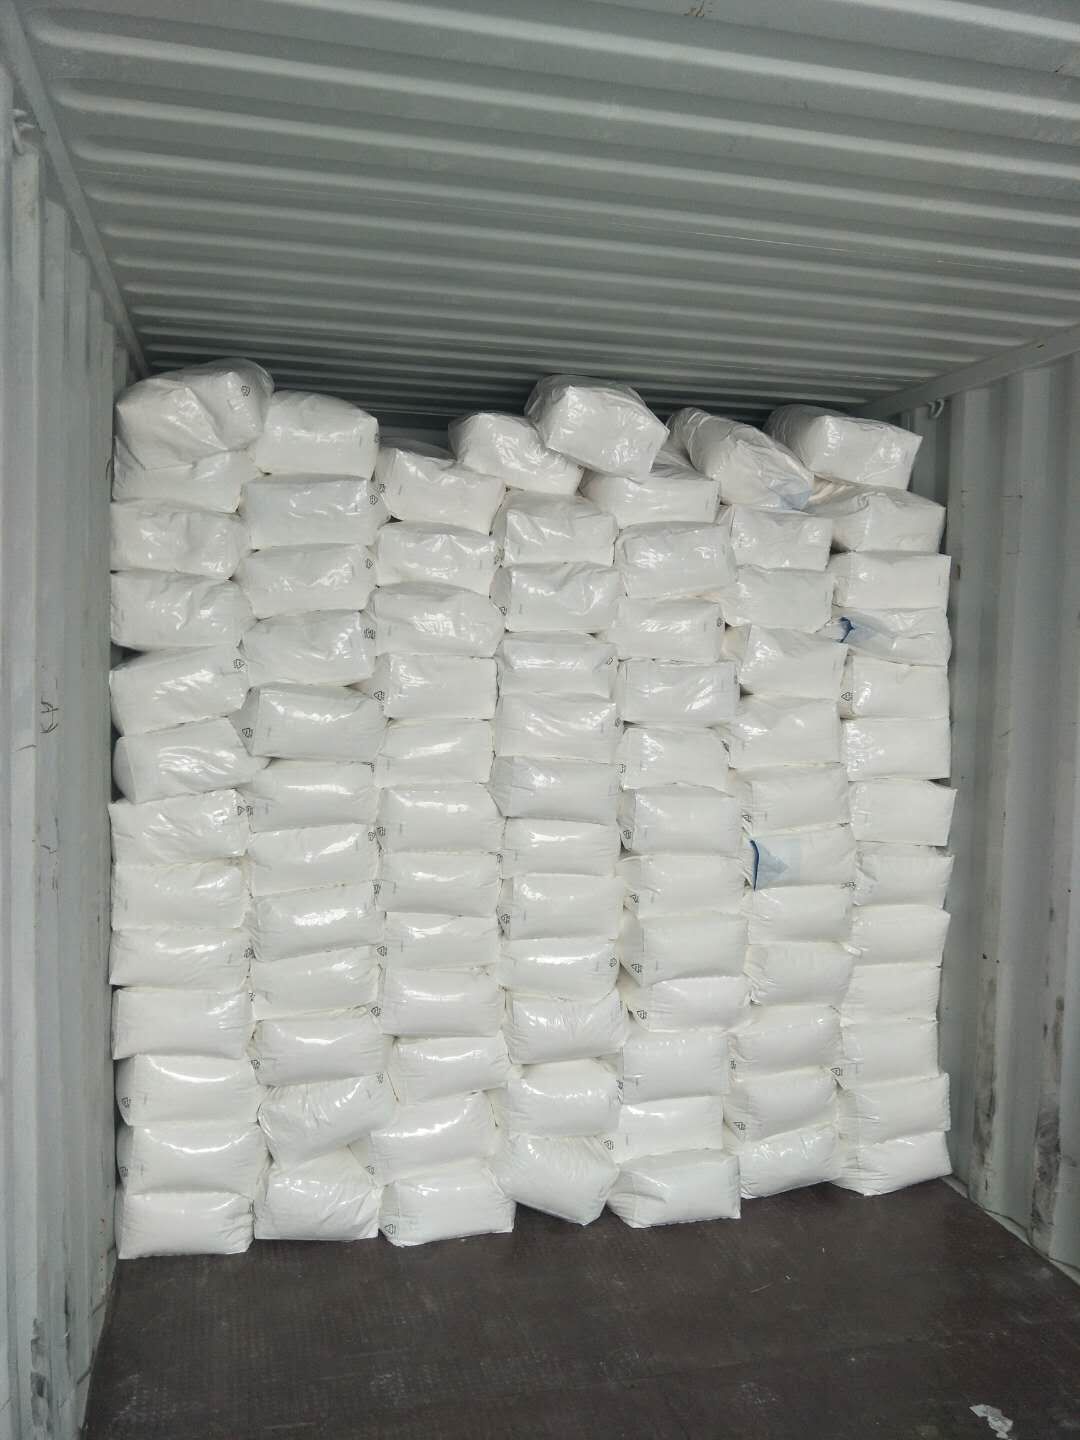 The FLOPAM EM640 of cationic polyacrylamide can be replaced by the  Chinafloc EM8008, China The FLOPAM EM640 of cationic polyacrylamide can be  replaced by the Chinafloc EM8008 manufacturer and supplier - ASIAFLOC